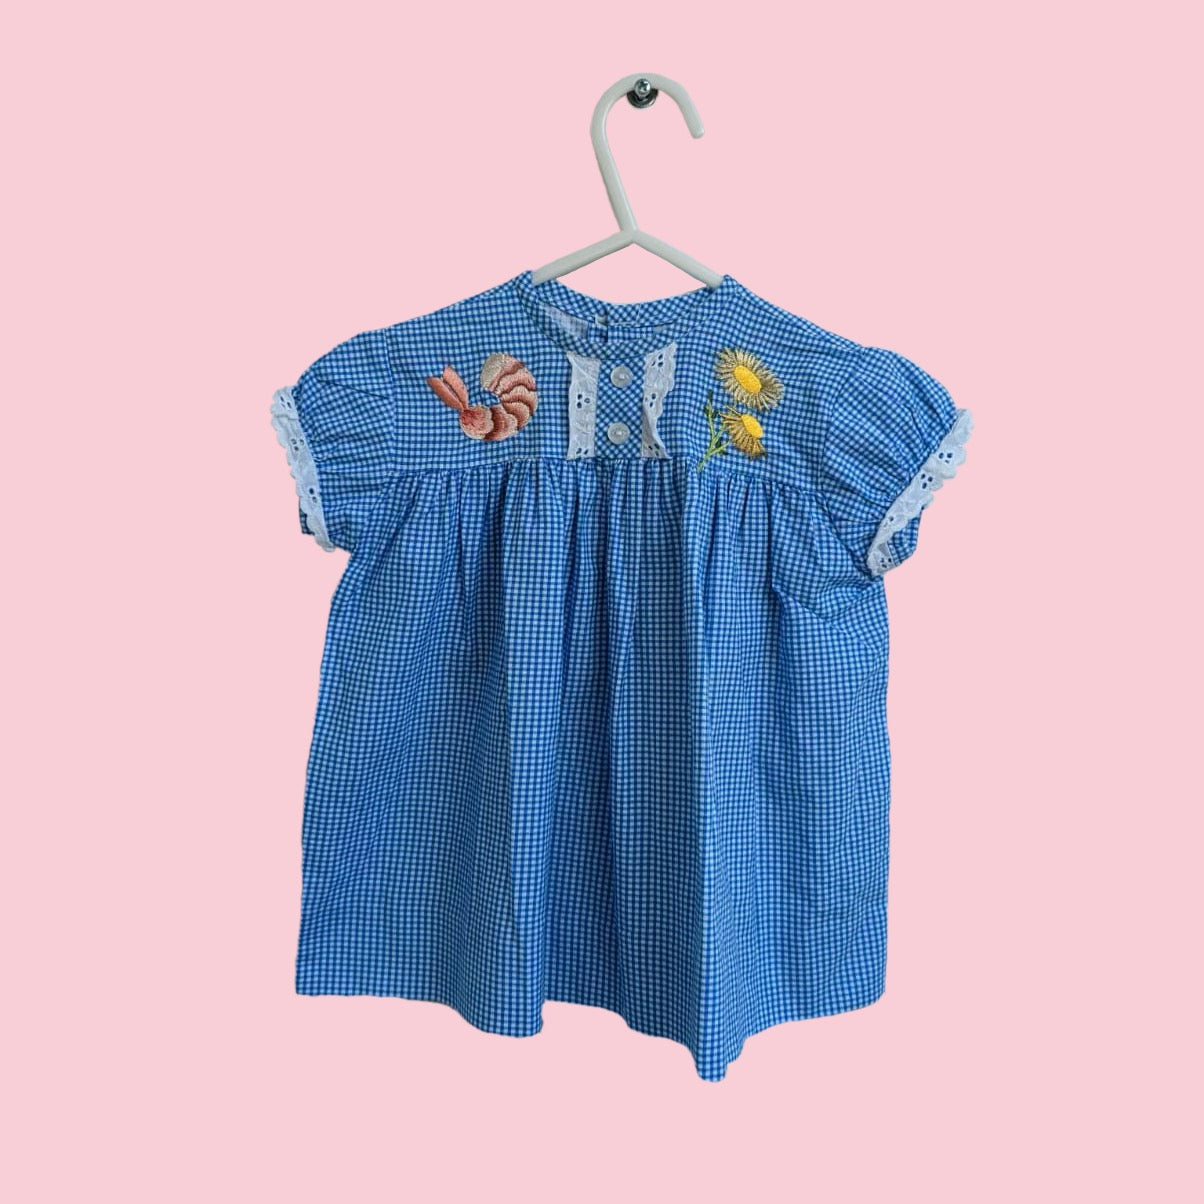 Blue Gingham Baby Dress With Embroidered Prawn & Metallic Daisy Motif